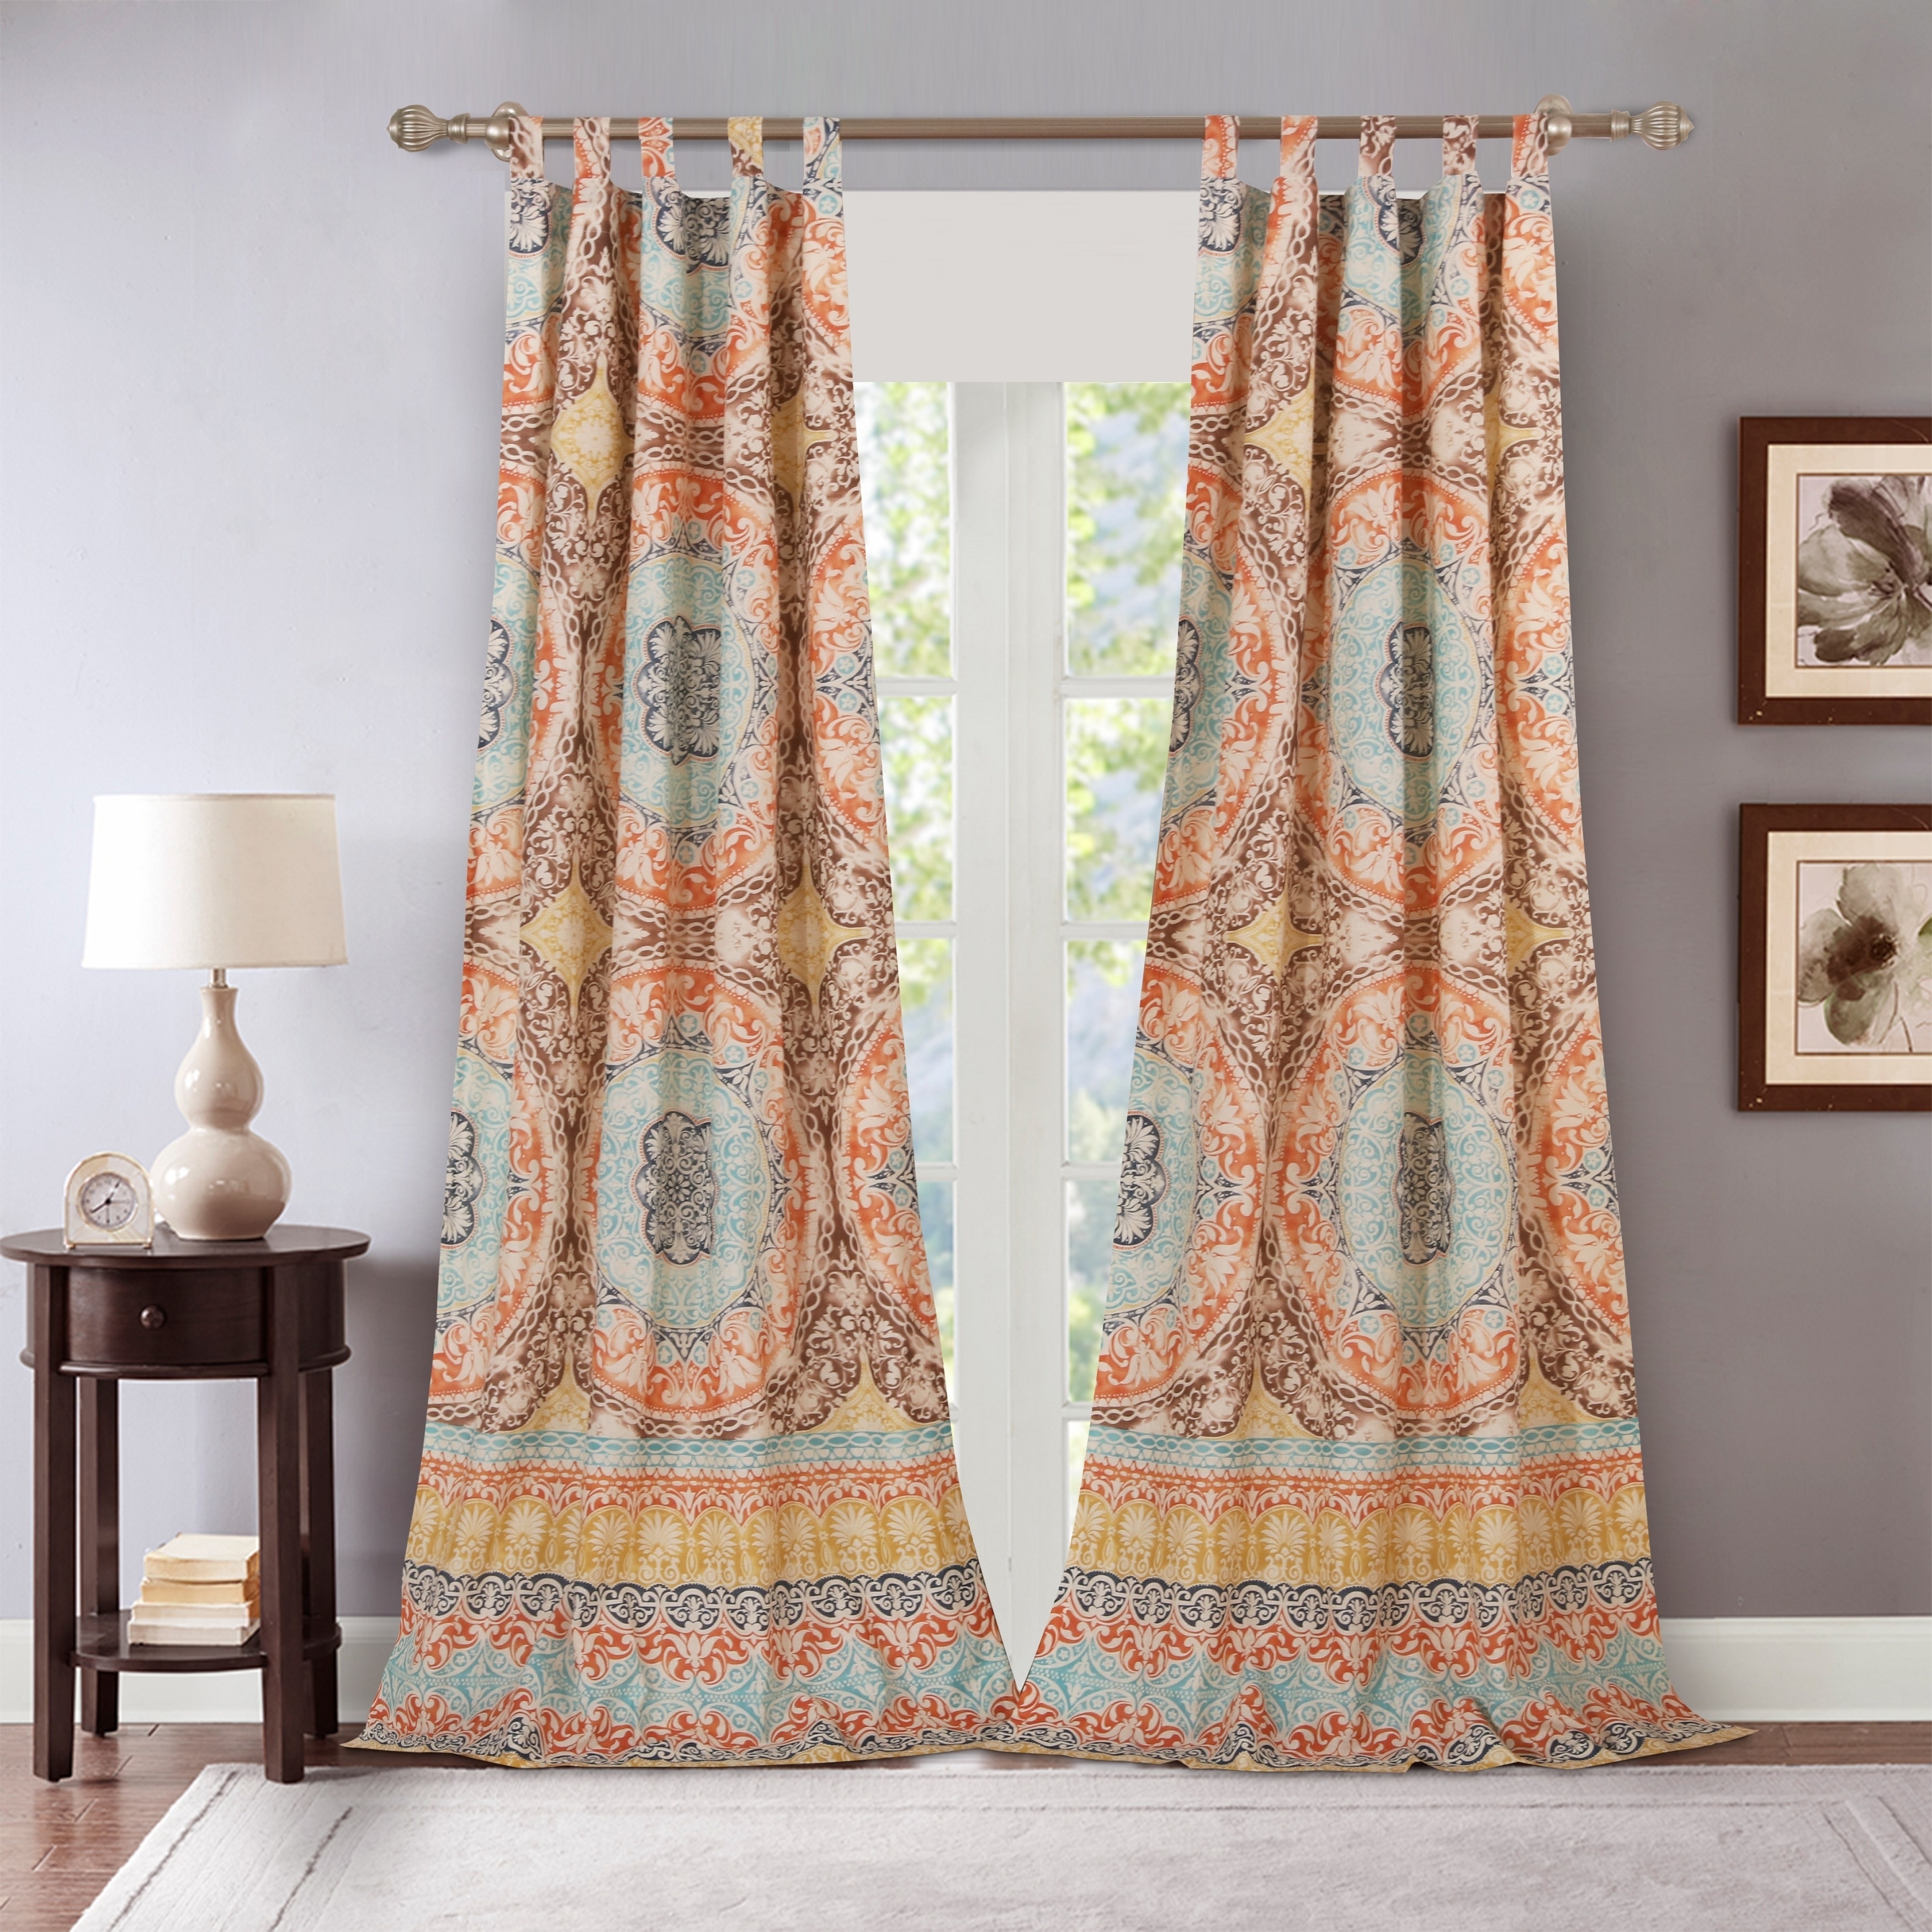 Barefoot Bungalow Olympia Curtain Panel (set of 2)